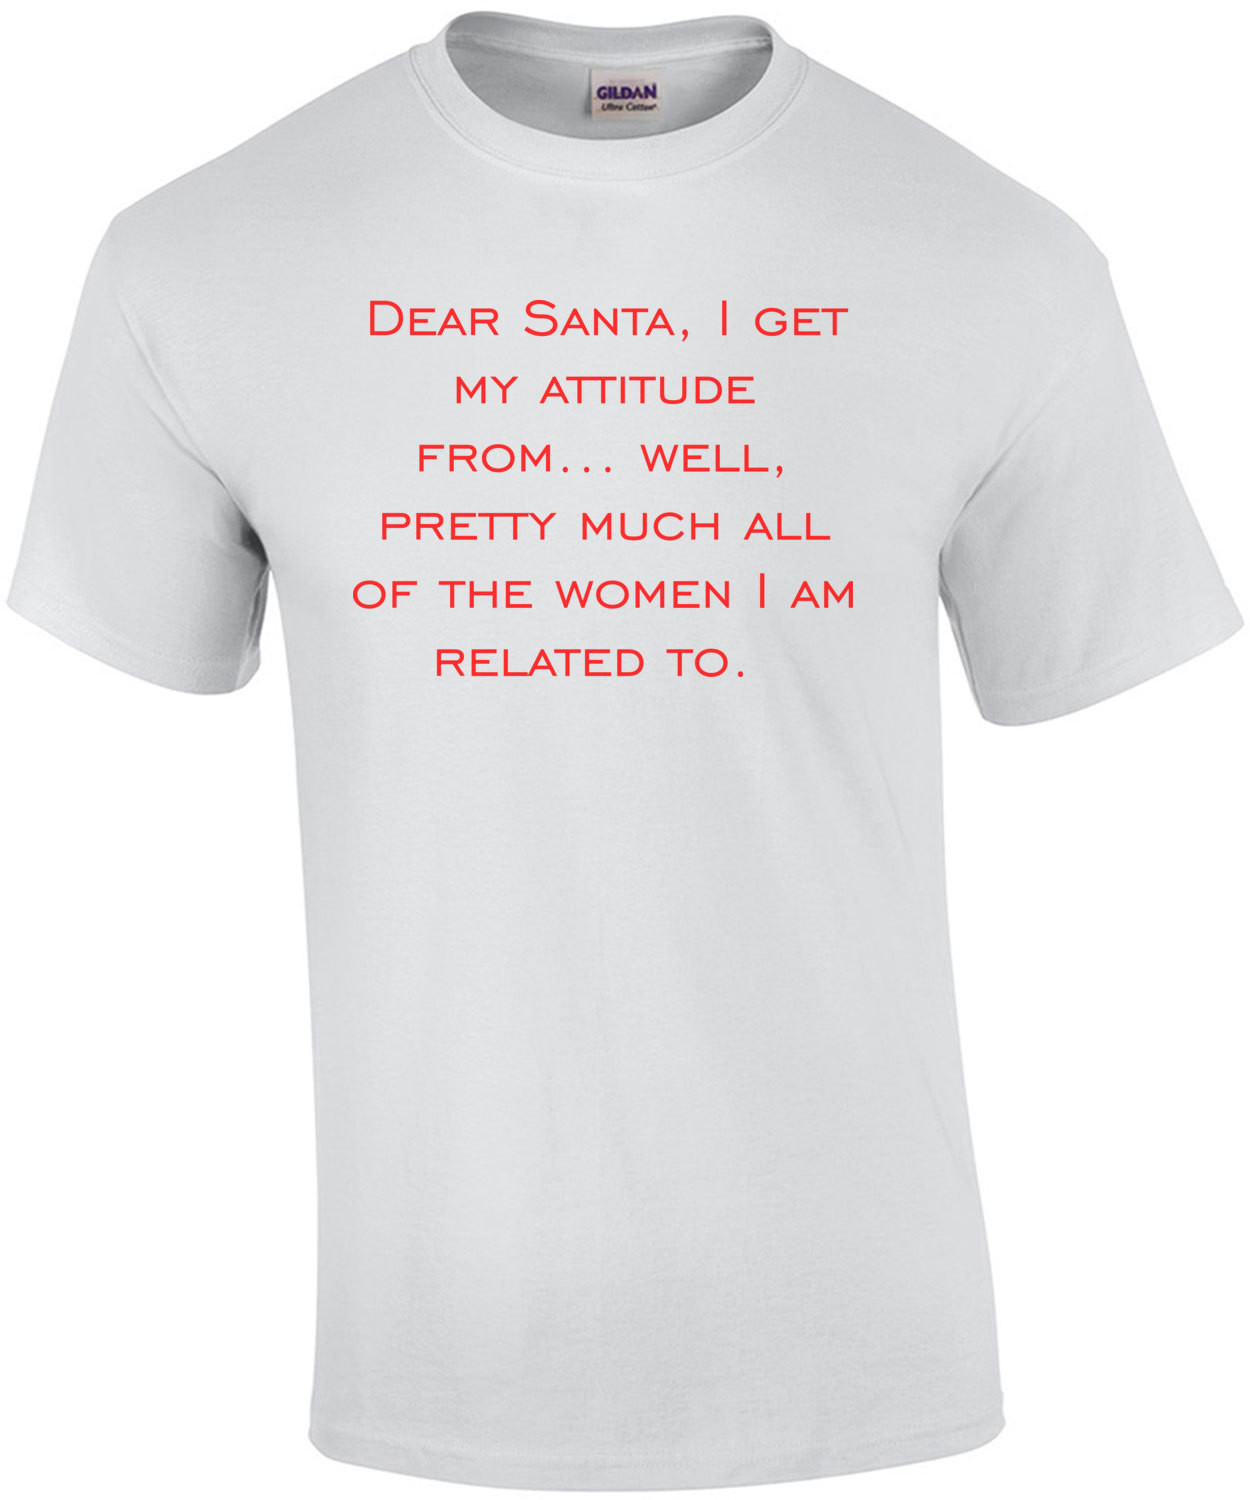 Dear Santa, I get my attitude from... well, pretty much all of the women I am related to. Funny Christmas T-Shirt